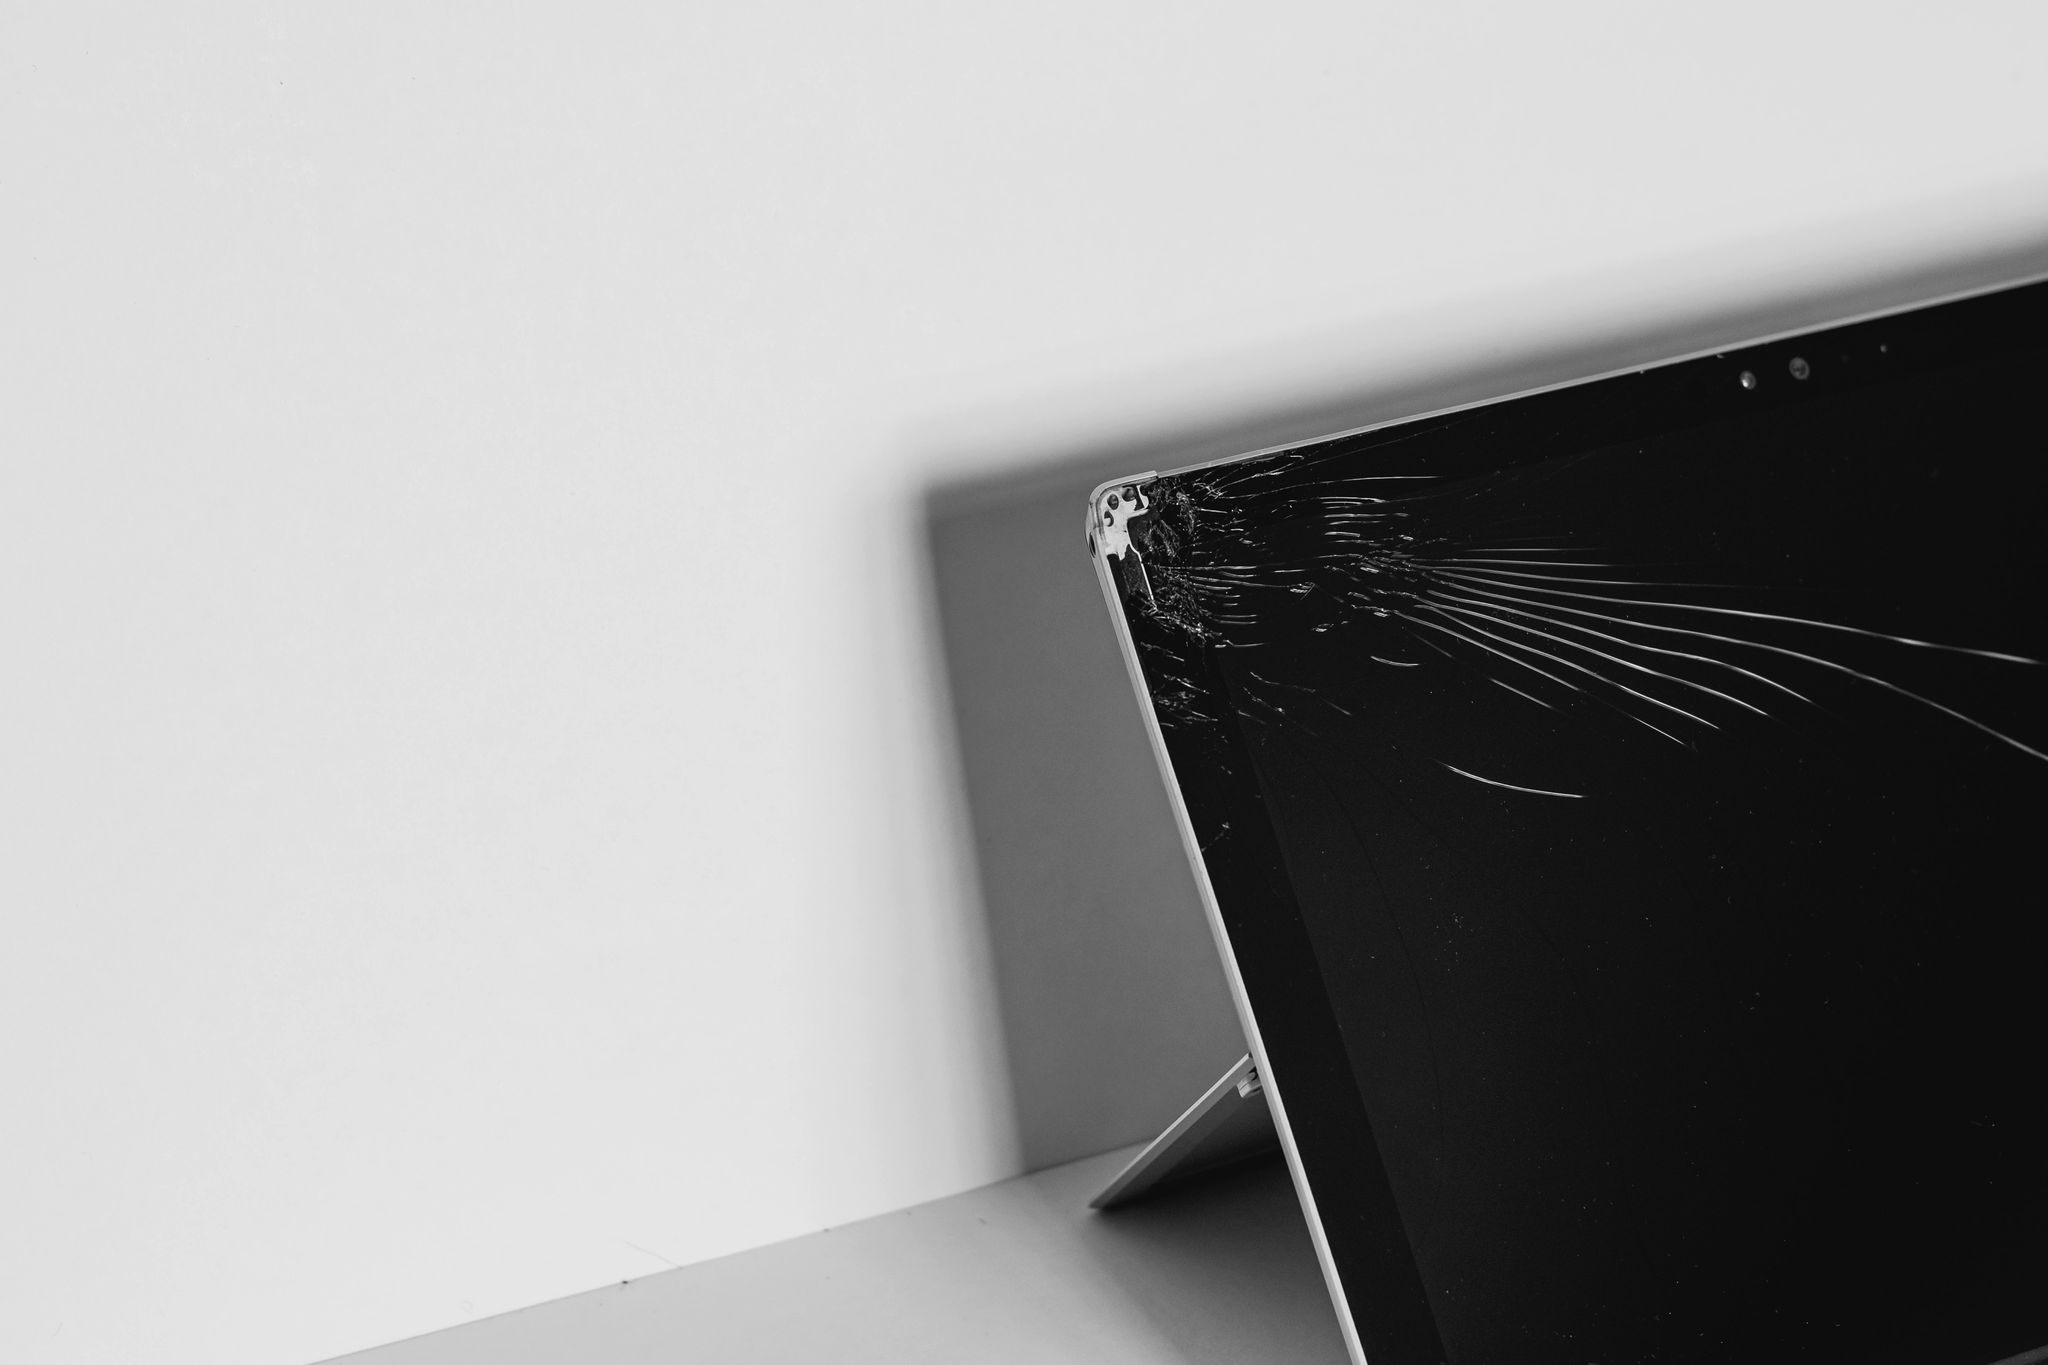 How To Fix A Cracked Screen On A Tablet